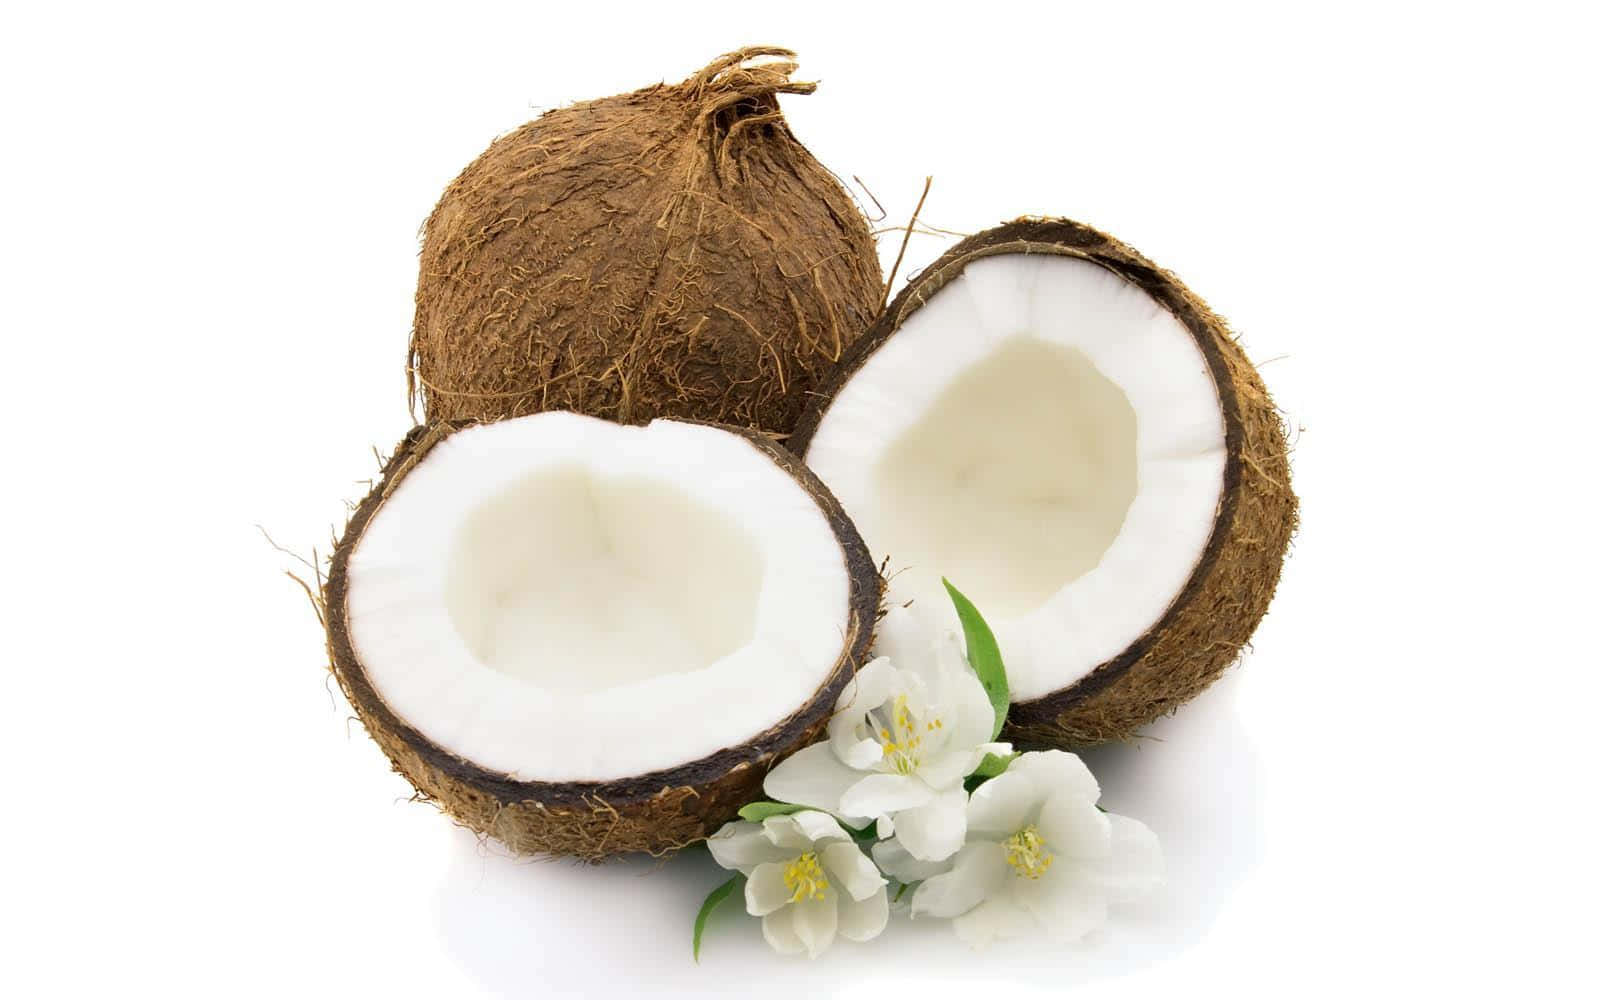 Coconut Oil And Flowers On A White Background